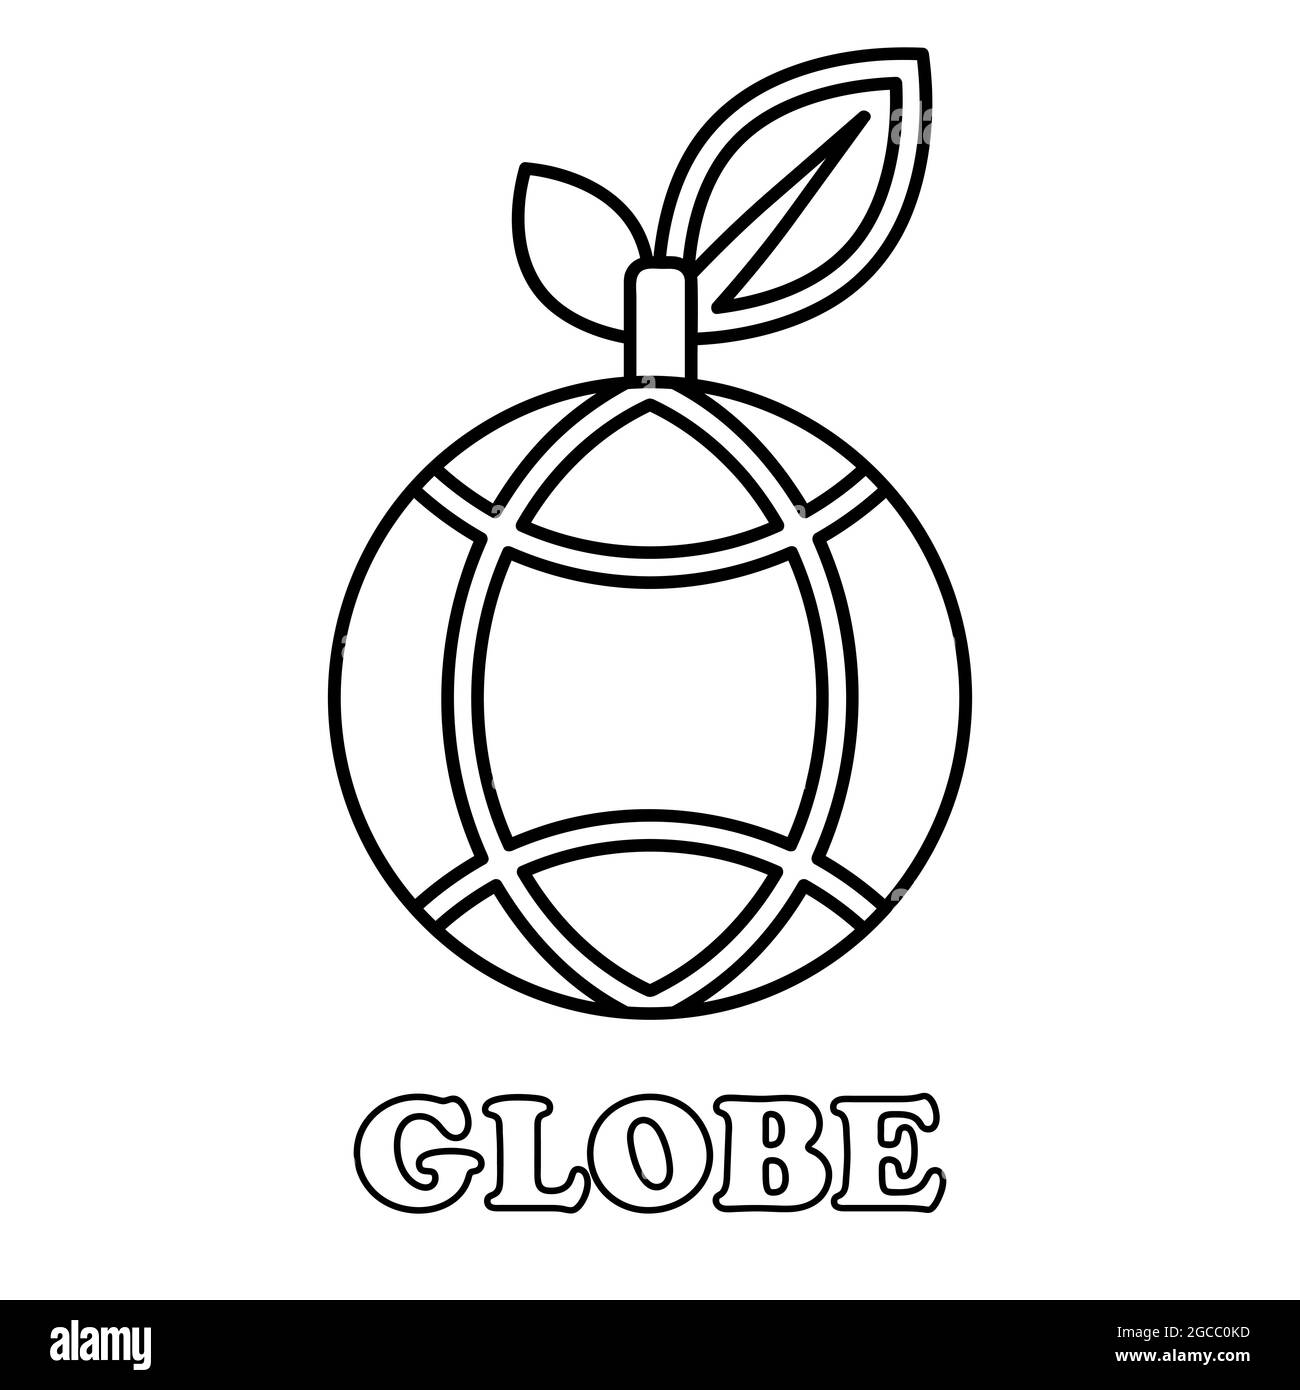 globe with leaf coloring page. coloring page for children. on white background Stock Photo